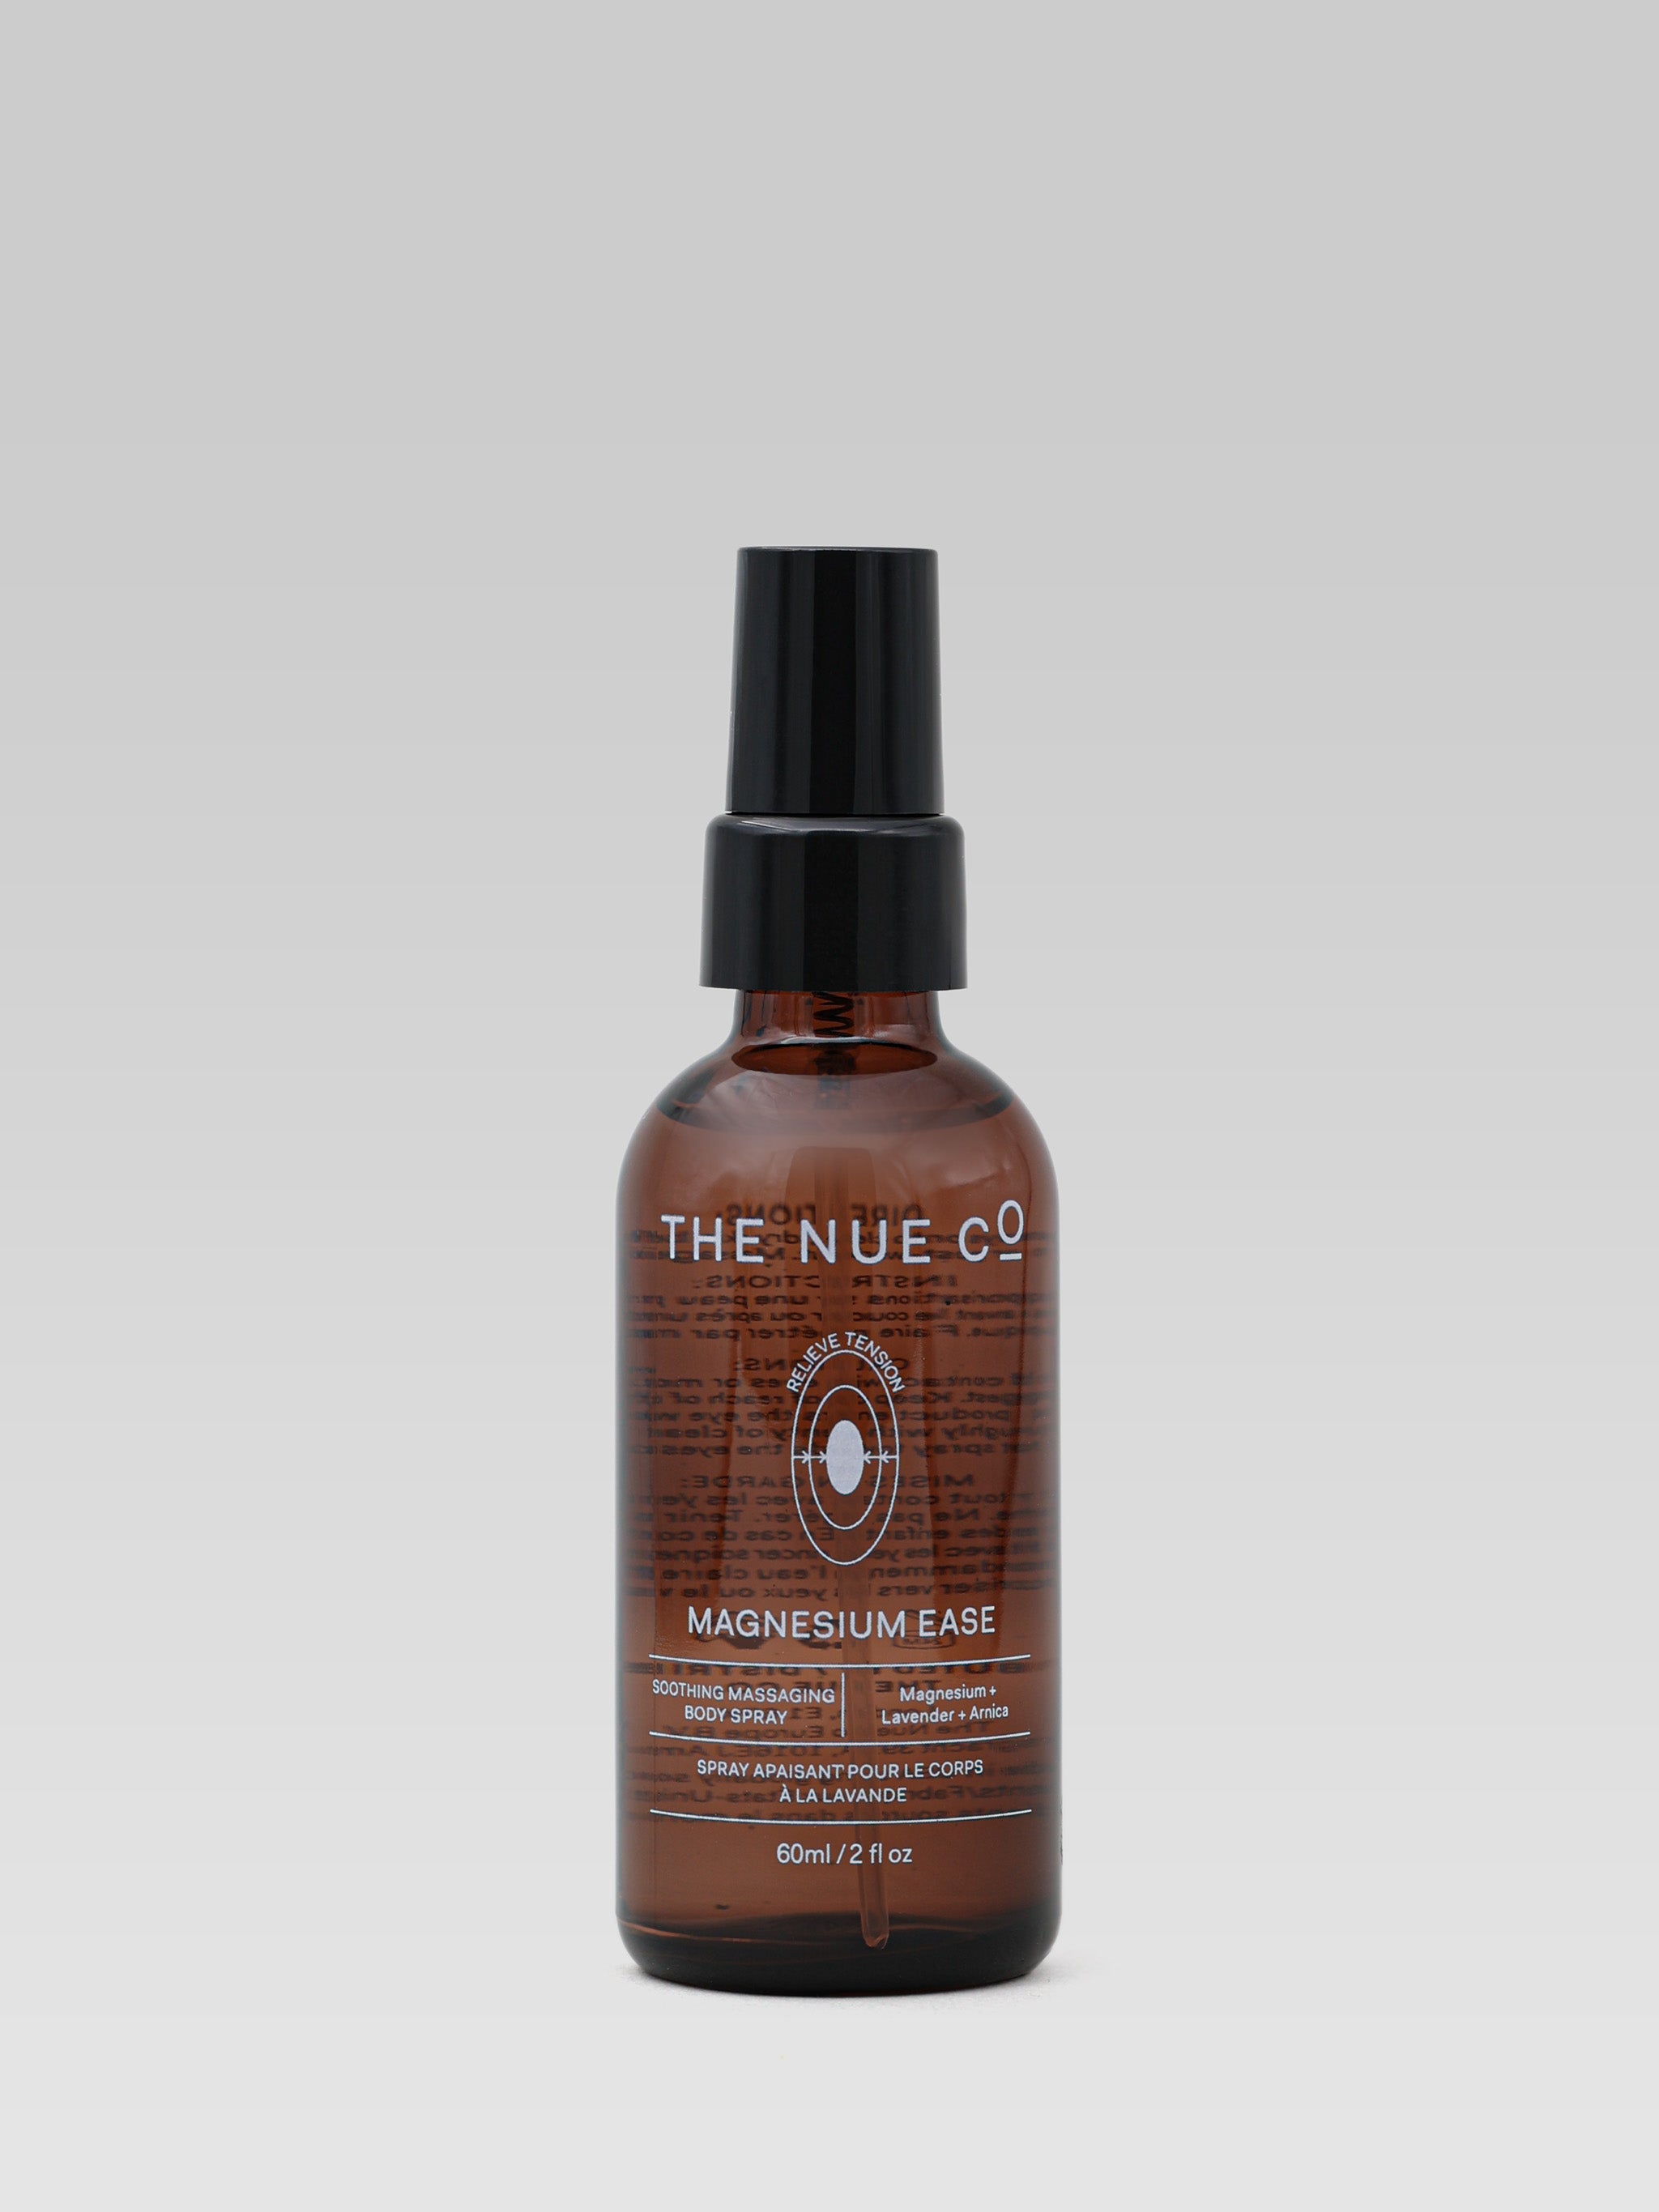 THE NUE CO Magnesium Ease product shot 